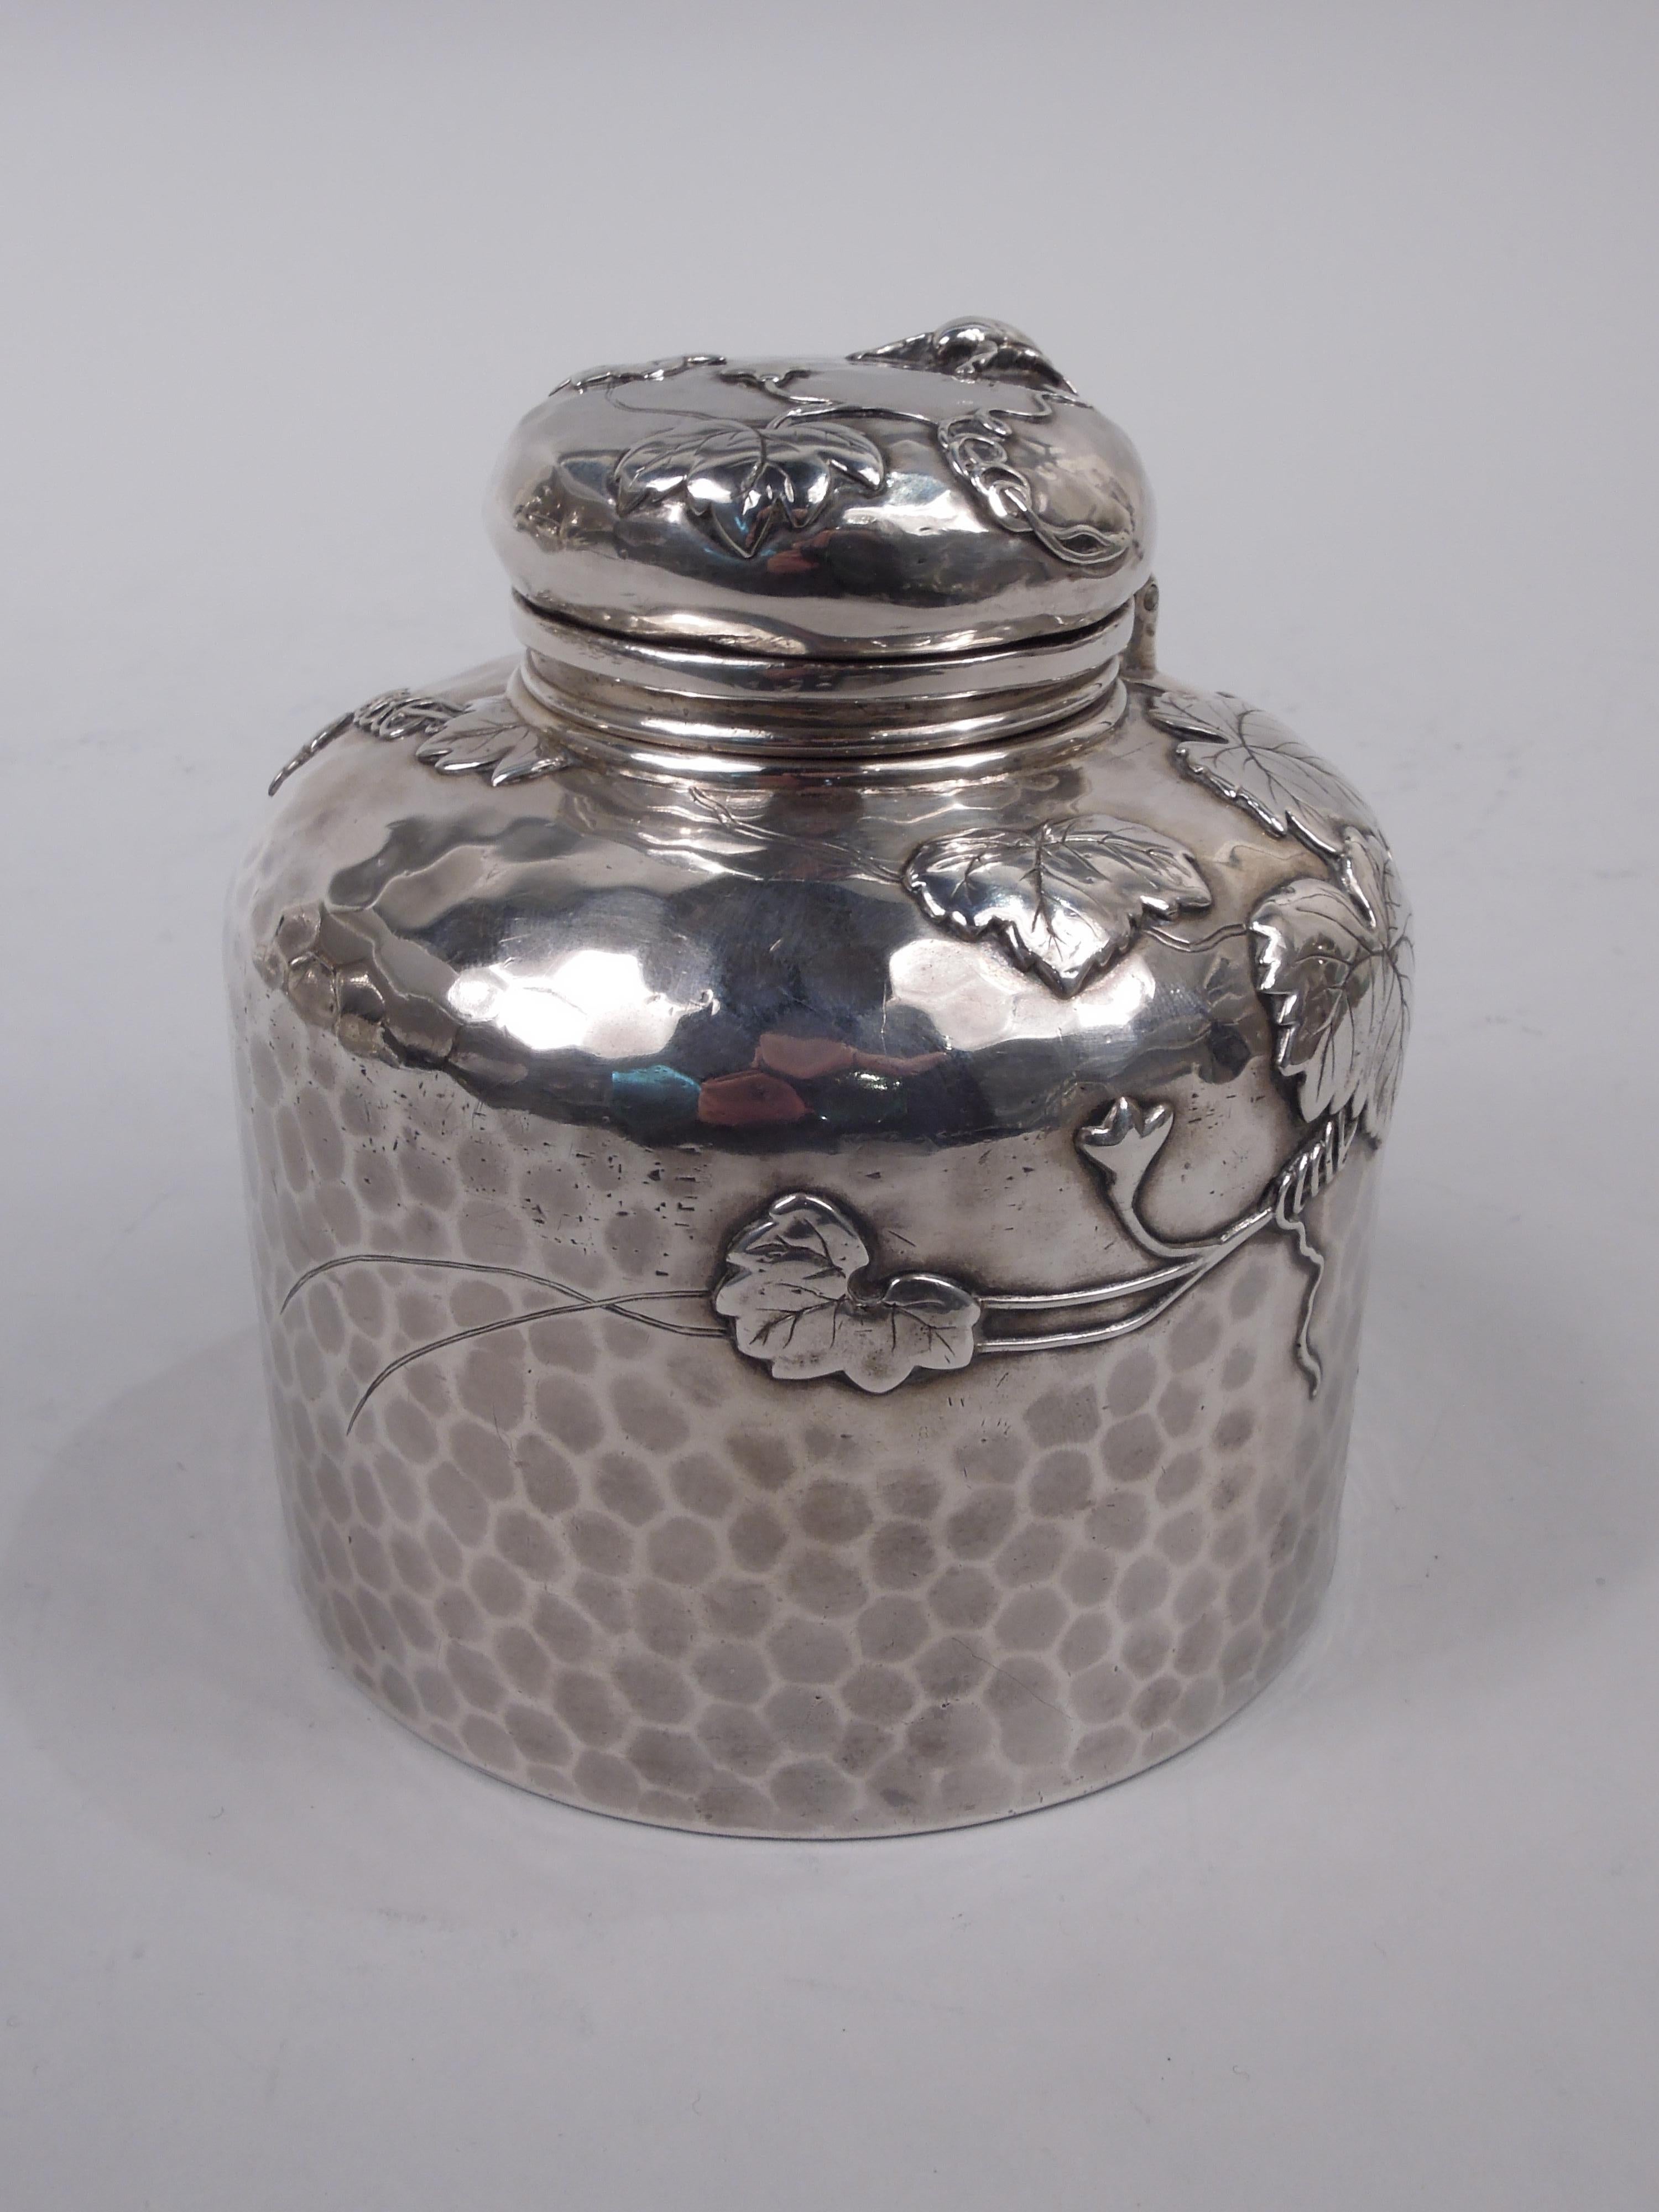 Japonesque sterling silver inkwell. Made by Tiffany & Co. in New York, ca 1882. Drum form with curved shoulder, short neck, and hinged and cork-lined bayonet cover. Leaves and tendrils and butterflies, too, applied to honeycomb hand-hammered ground.